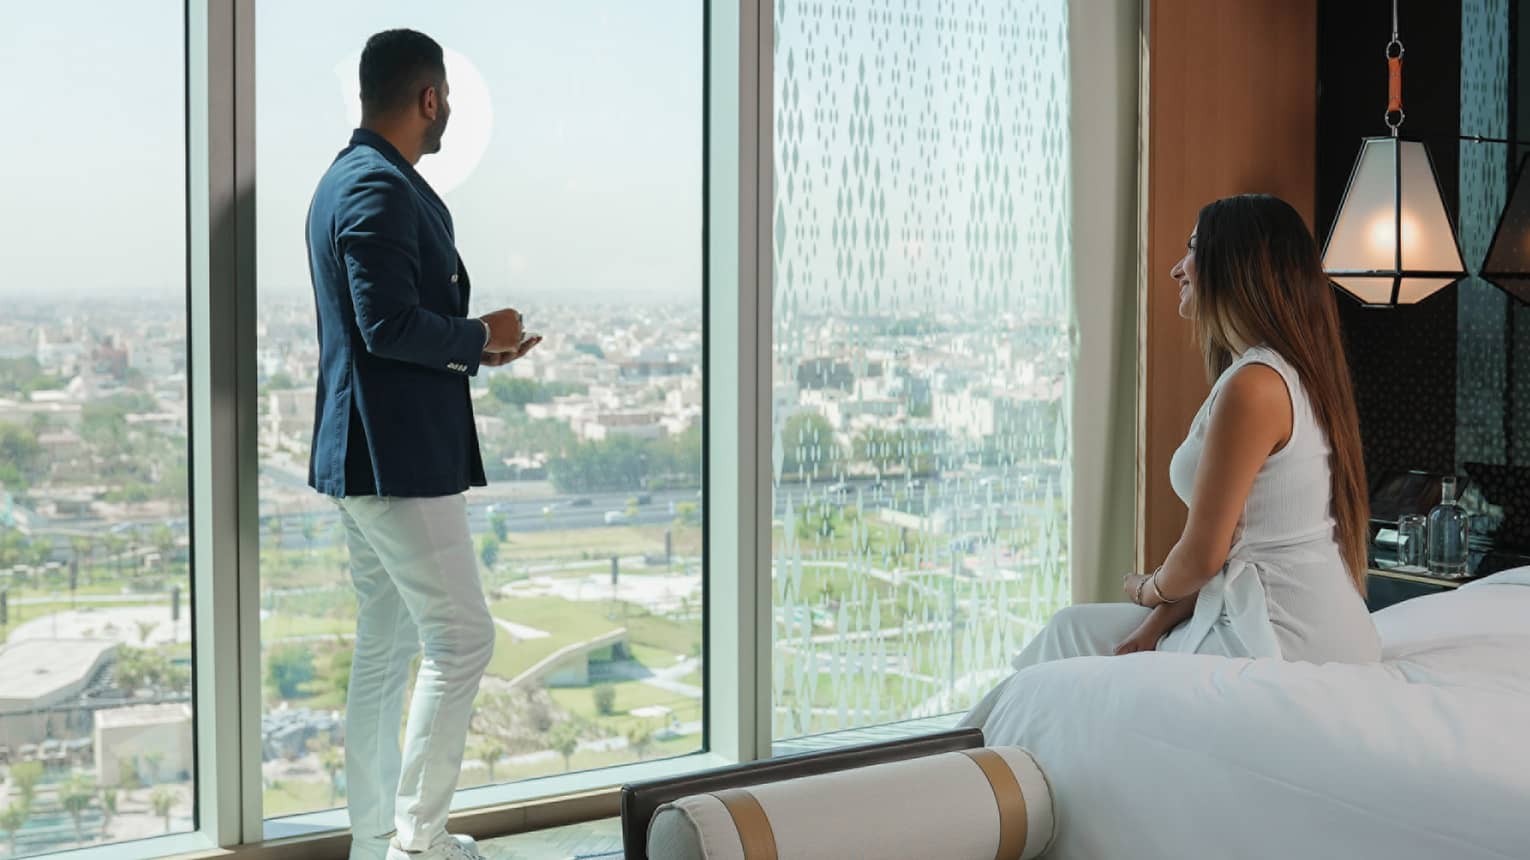 Man and woman in hotel room, looking out floor-to-ceiling window